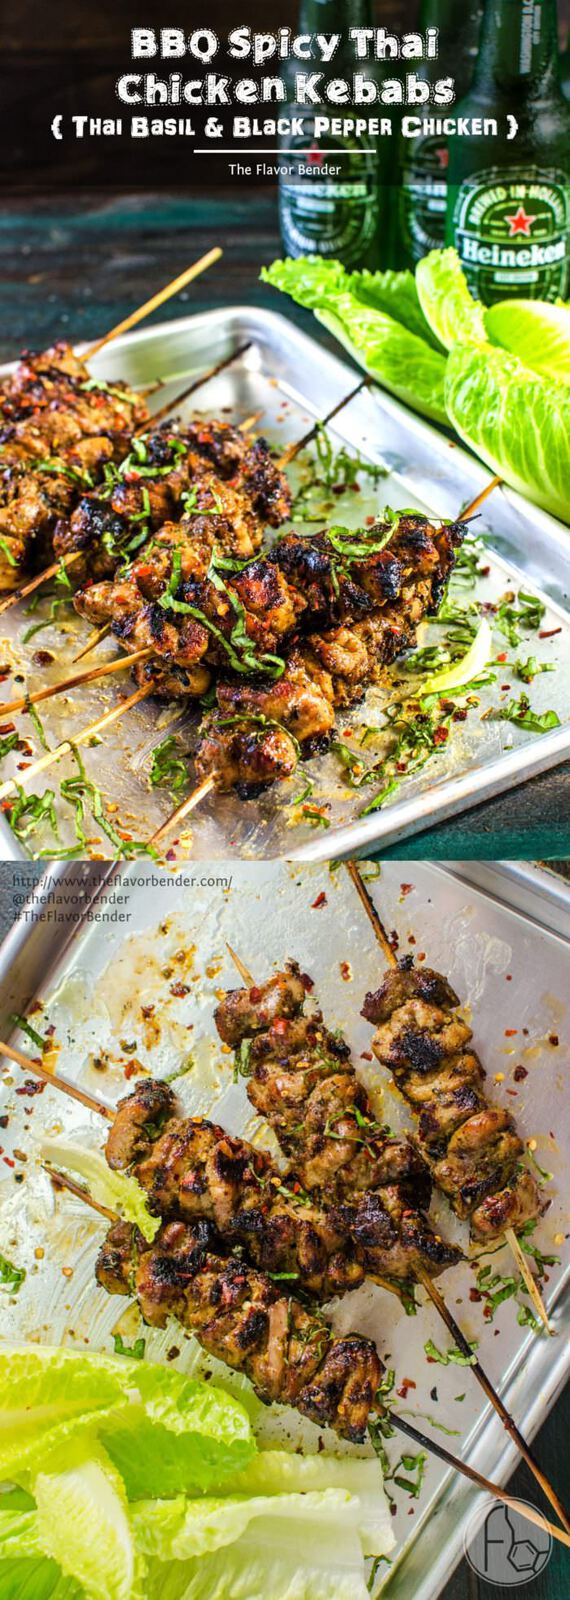 [Msg 4 21+] Spicy Thai Chicken Kebabs - With aromatic peppery authentic Thai Flavors these Black Pepper and Thai Basil Chicken are perfect for a backyard summer BBQ [ad]